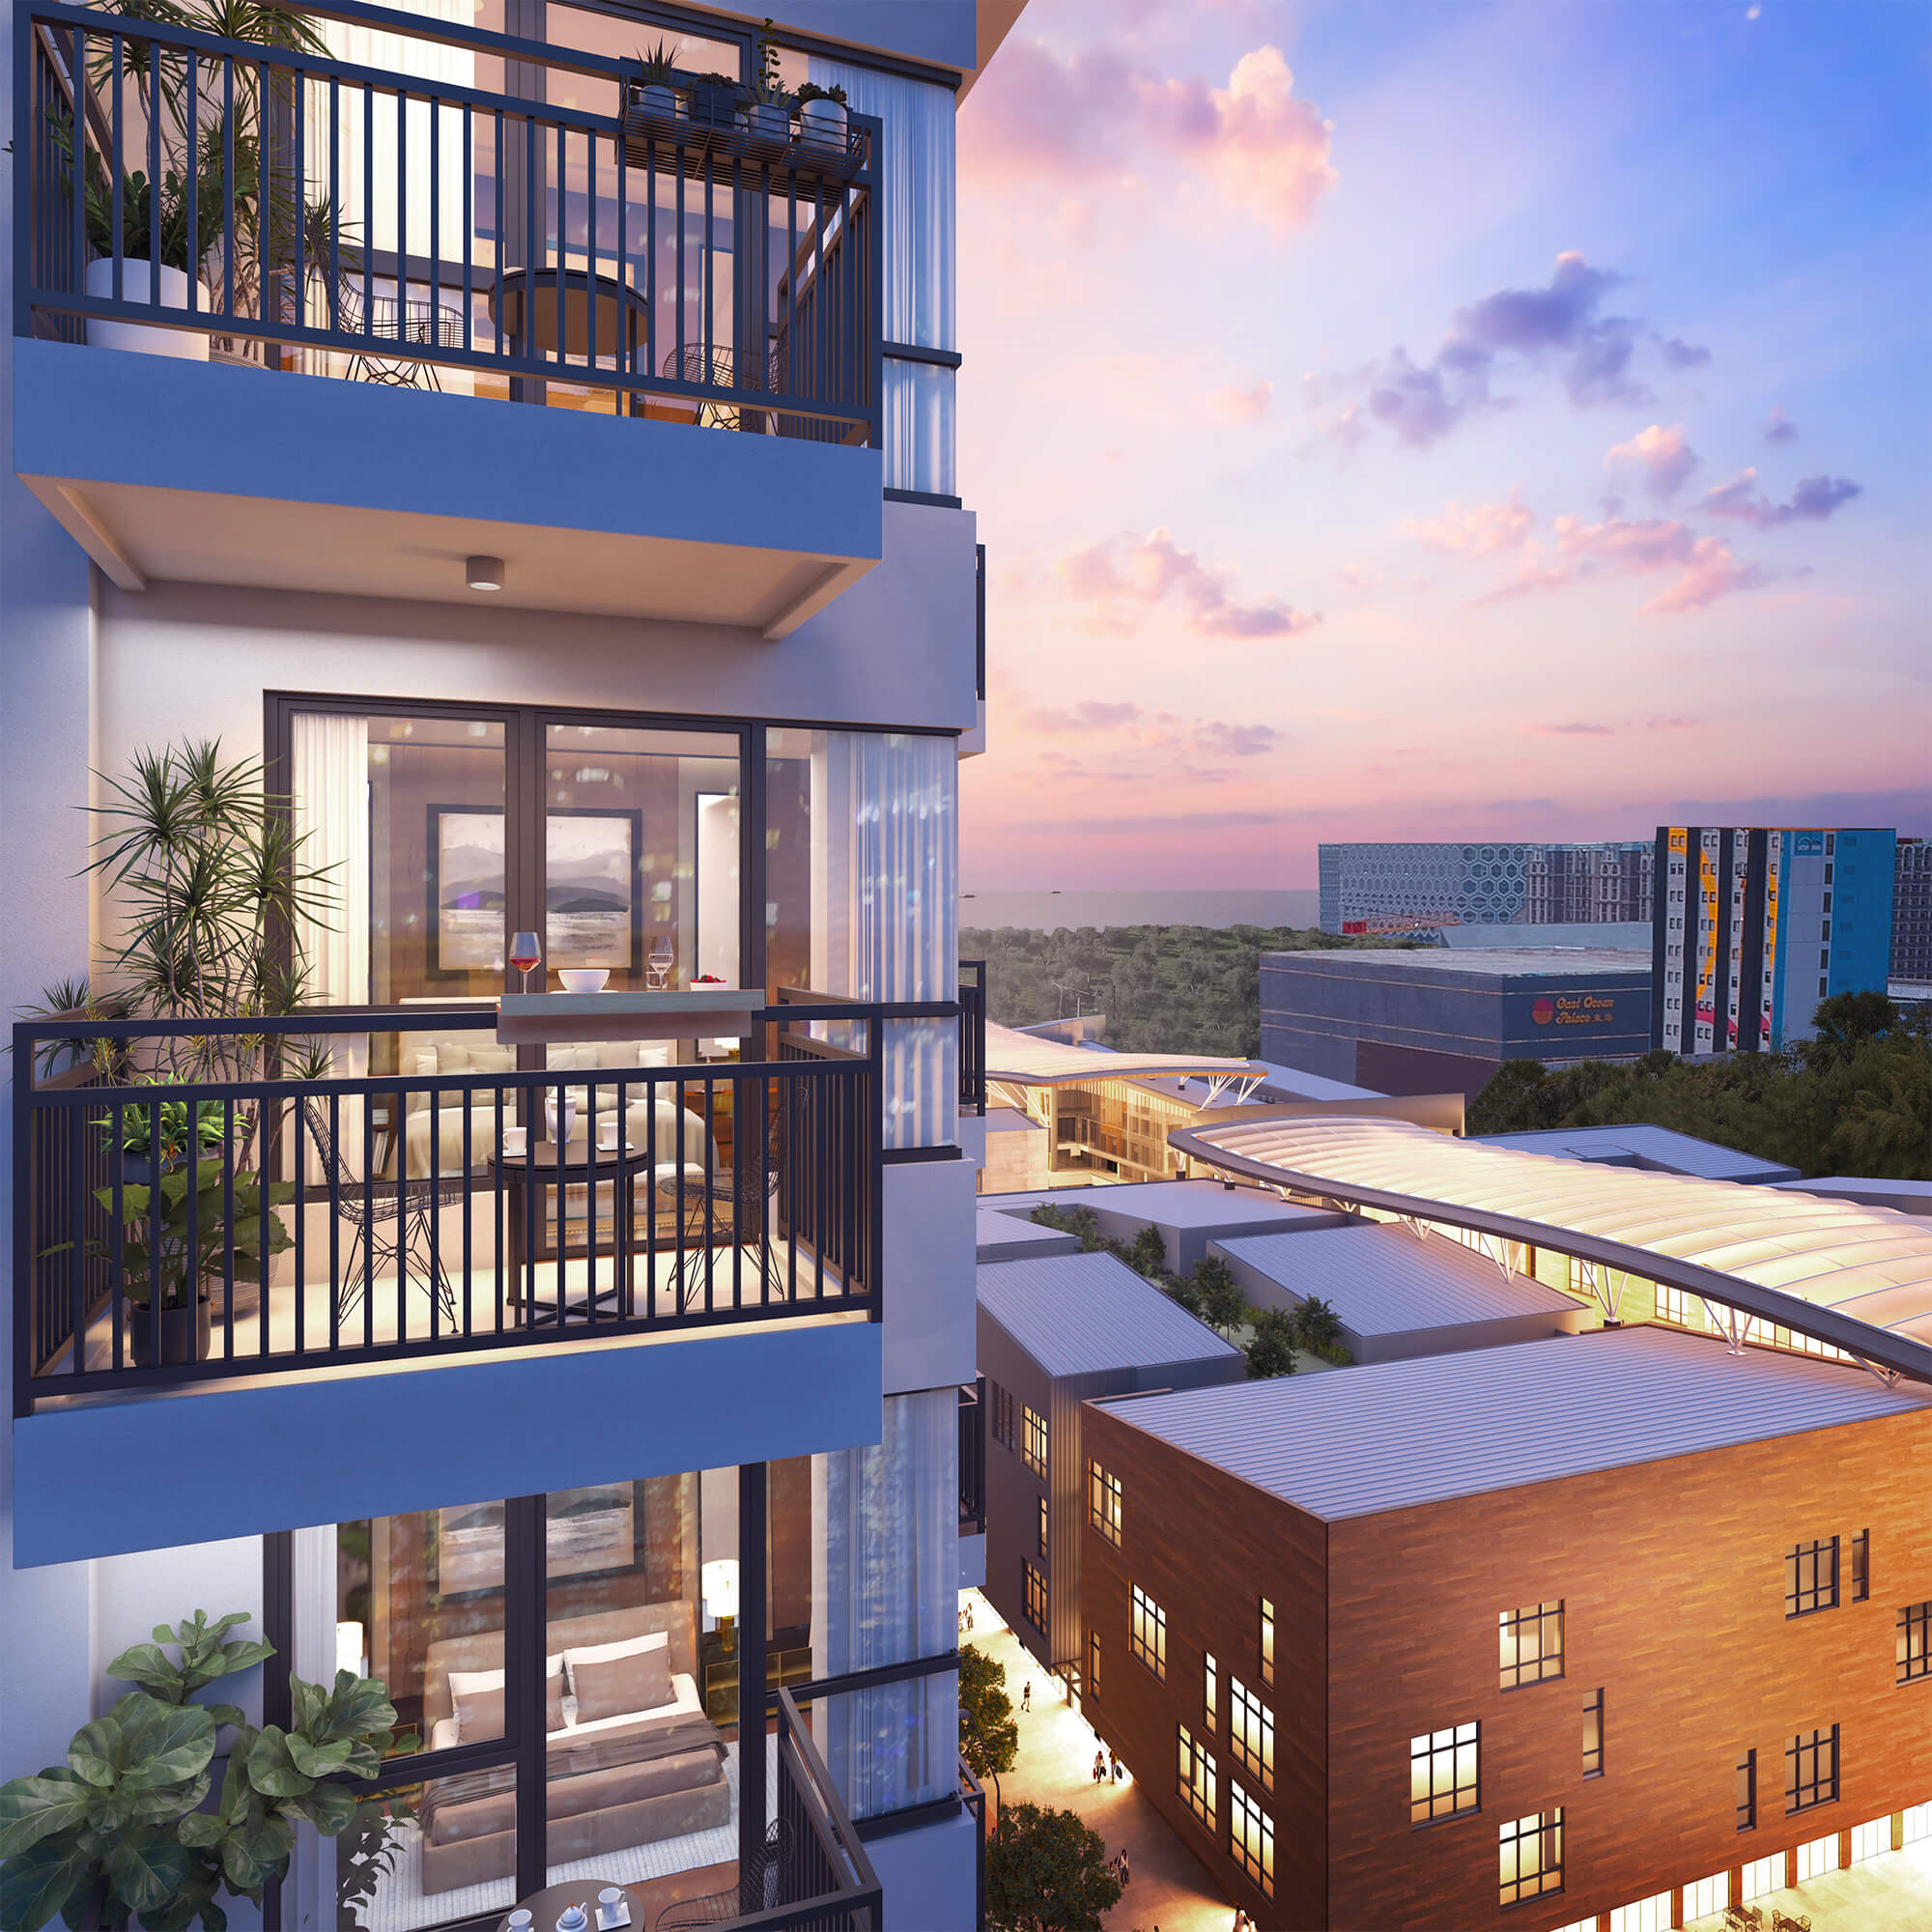 House vs. Condo: Which is a better investment?